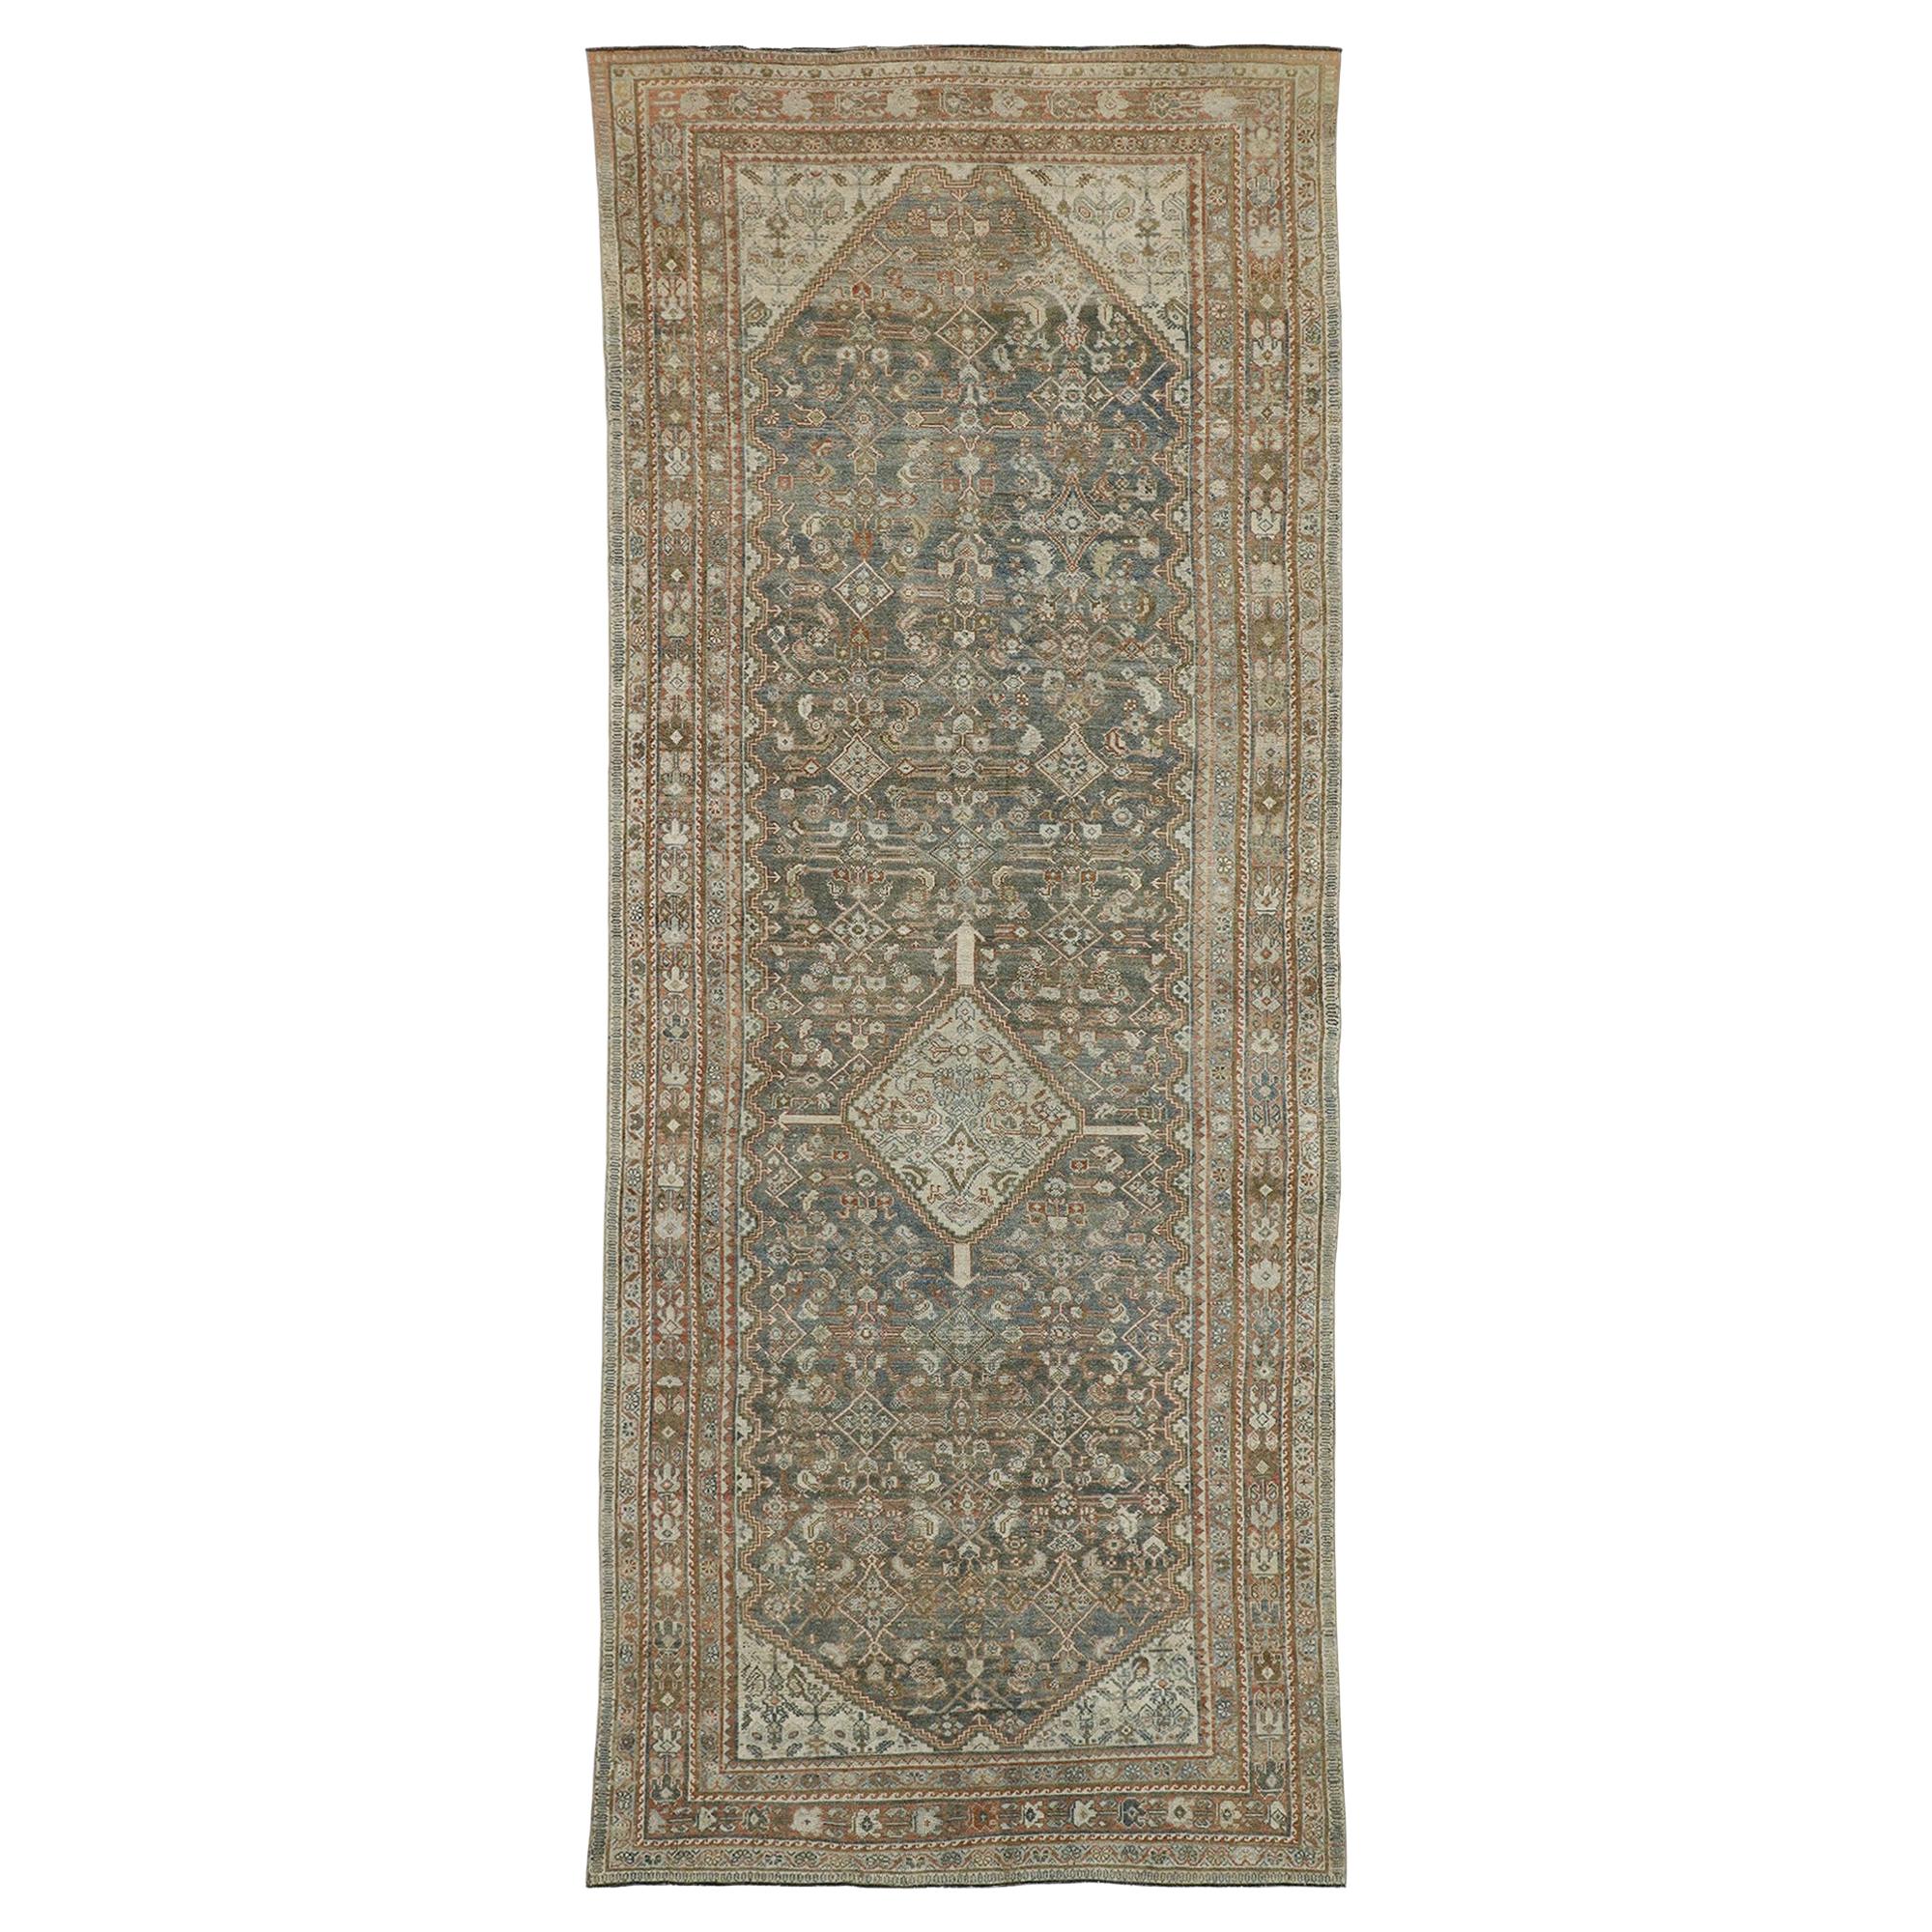 Distressed Antique Persian Malayer Style Gallery Rug with Rustic Craftsman Style